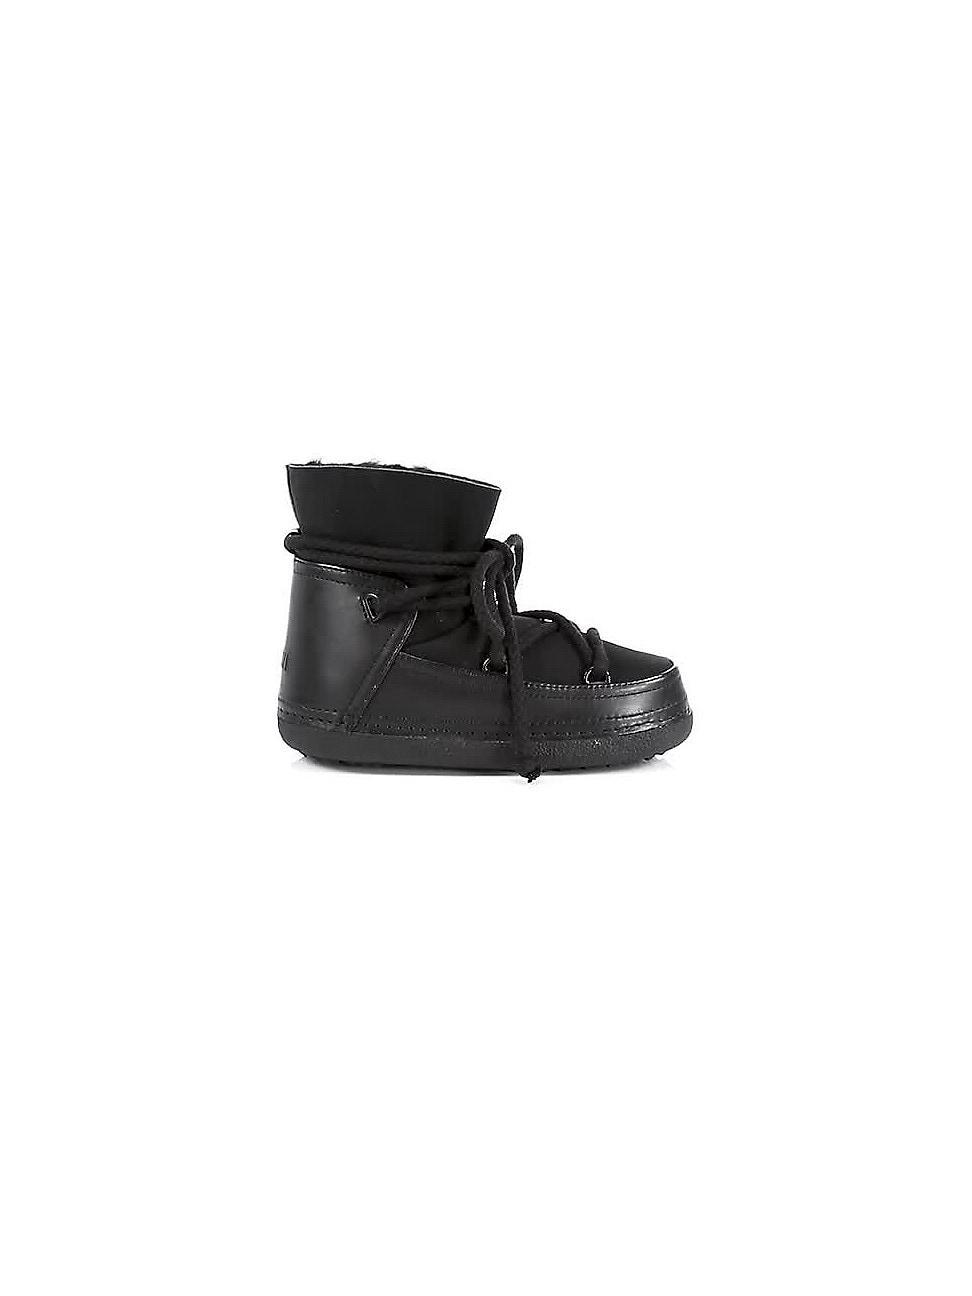 Womens Classic Leather Shearling Boots Product Image